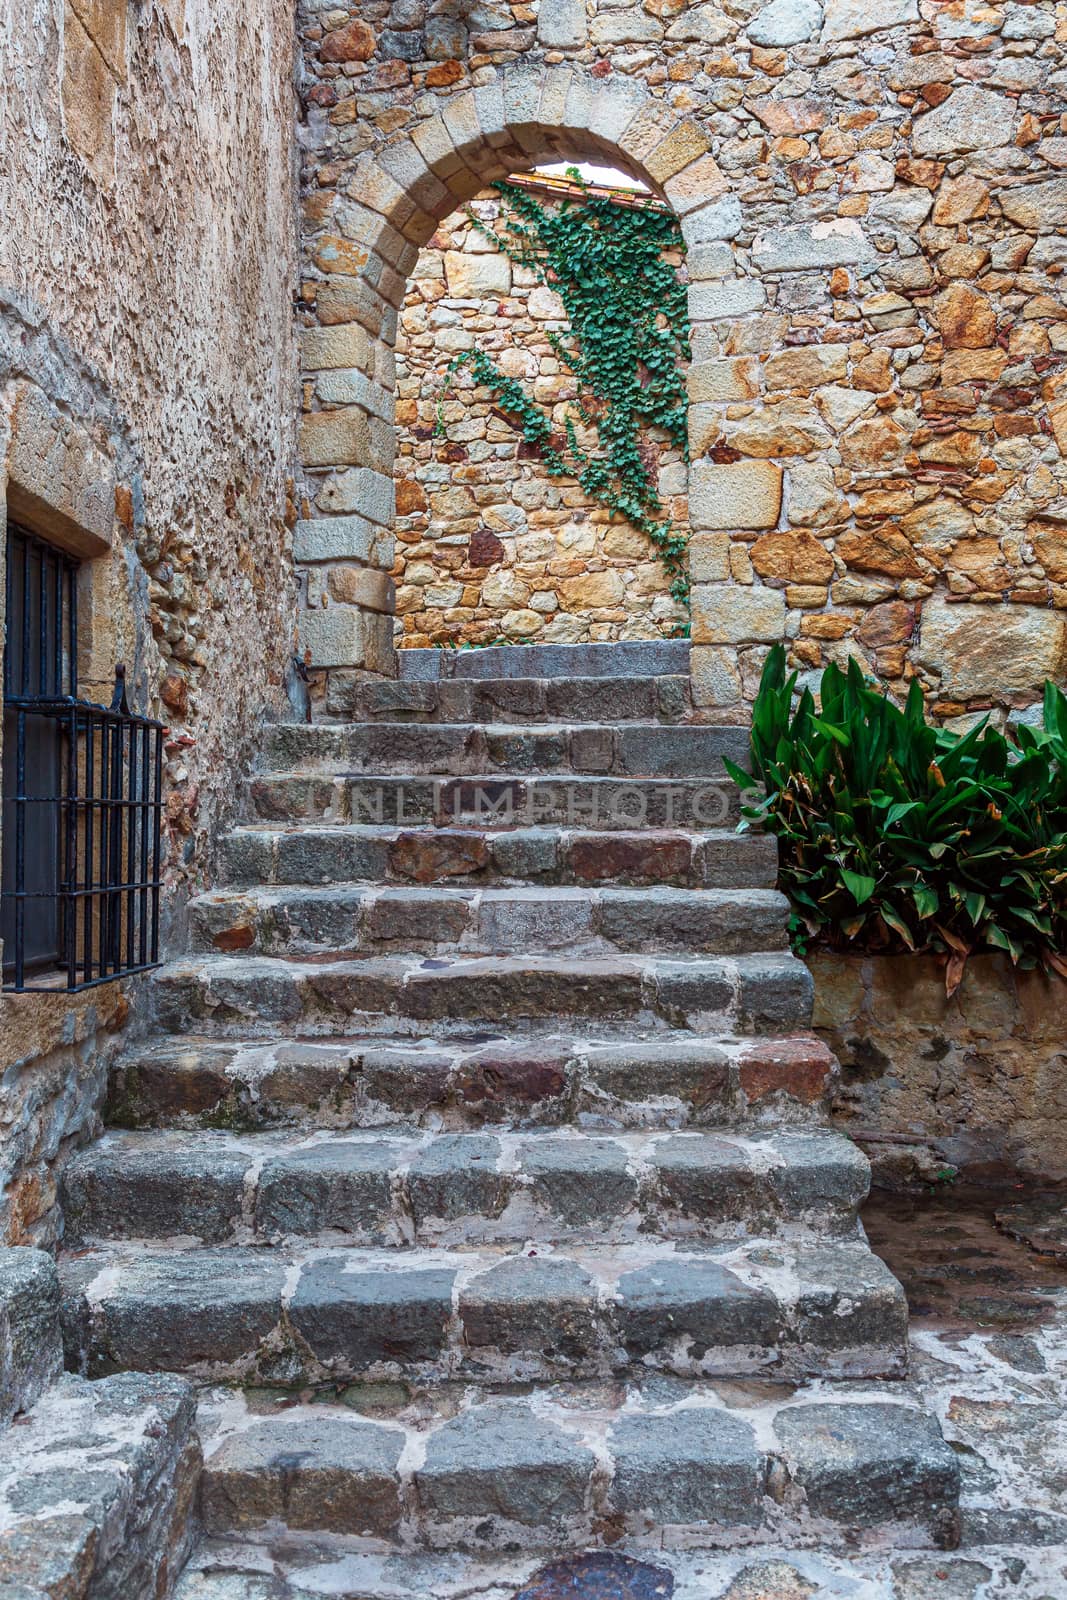 Castle de Pals, a staircase leading through an arch to the center of the castle. Pals, Spain